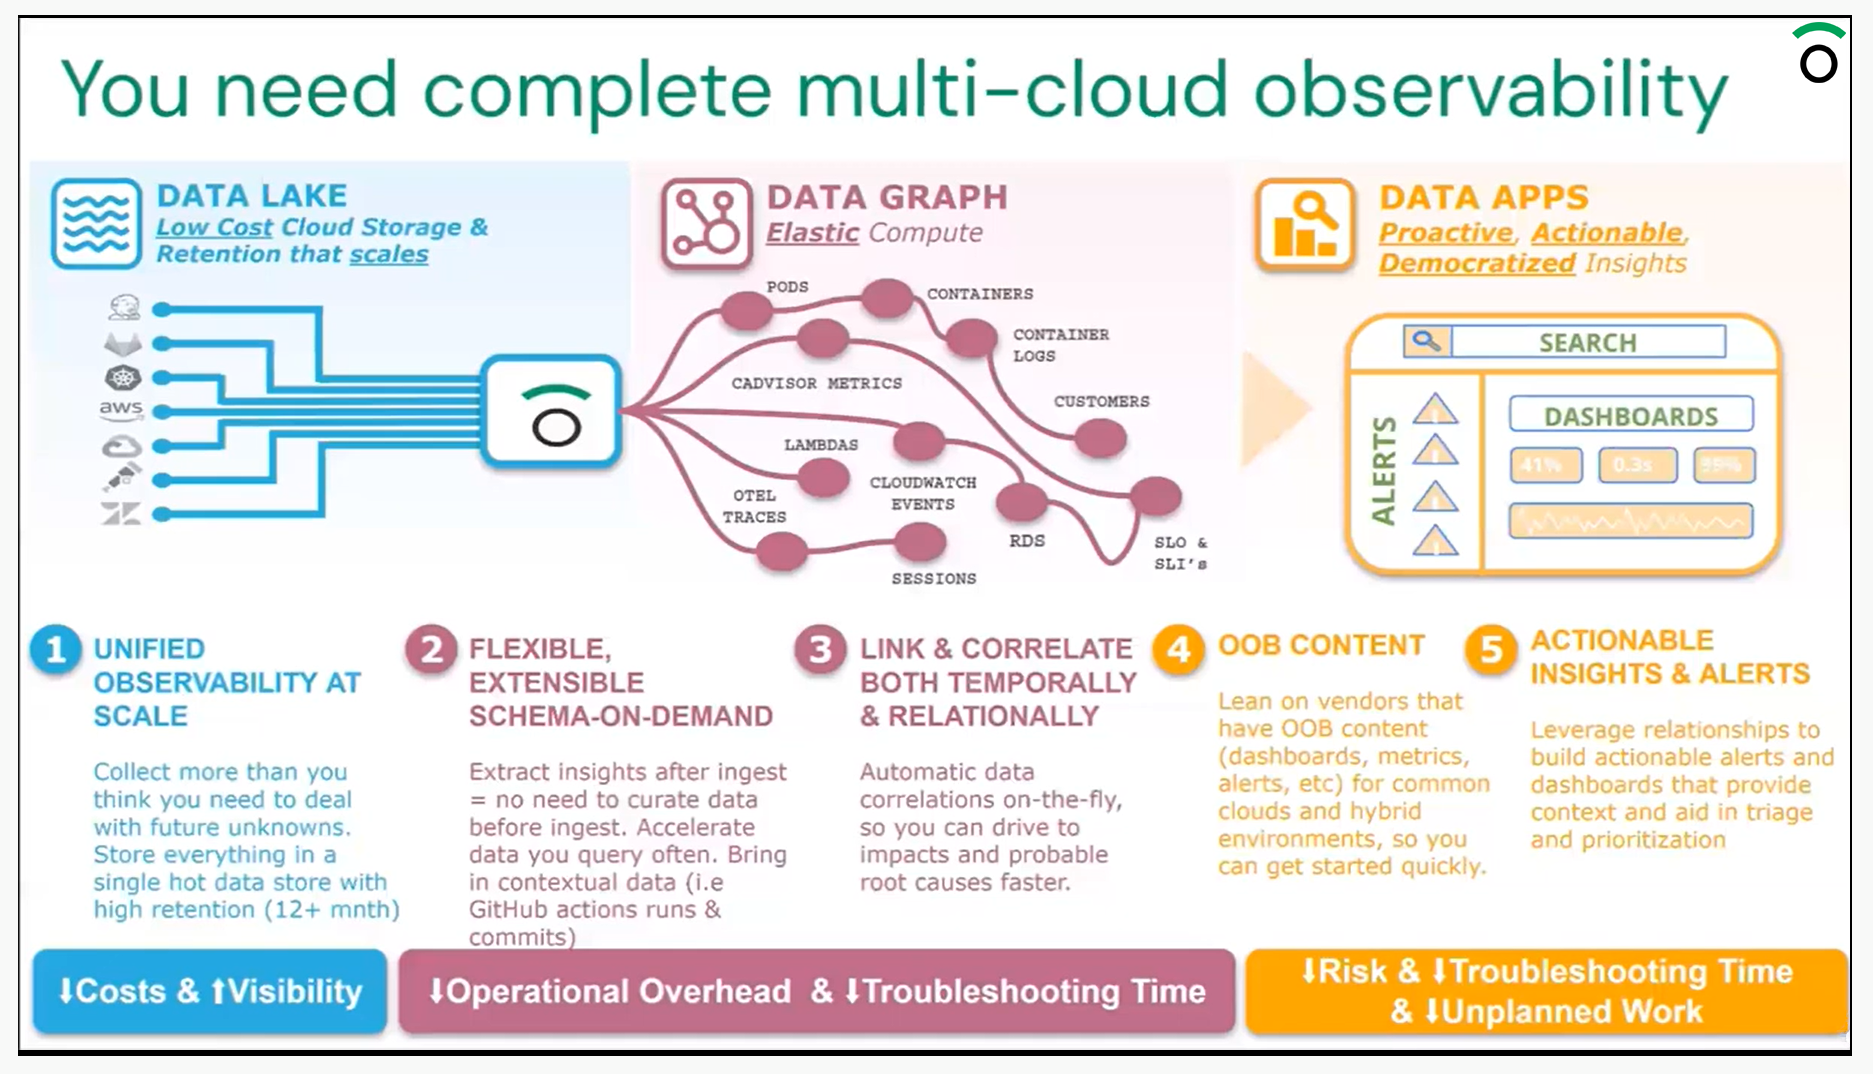 Chart showing multi-cloud observability considerations, including Data Lake, Data Graphs, and Data Apps